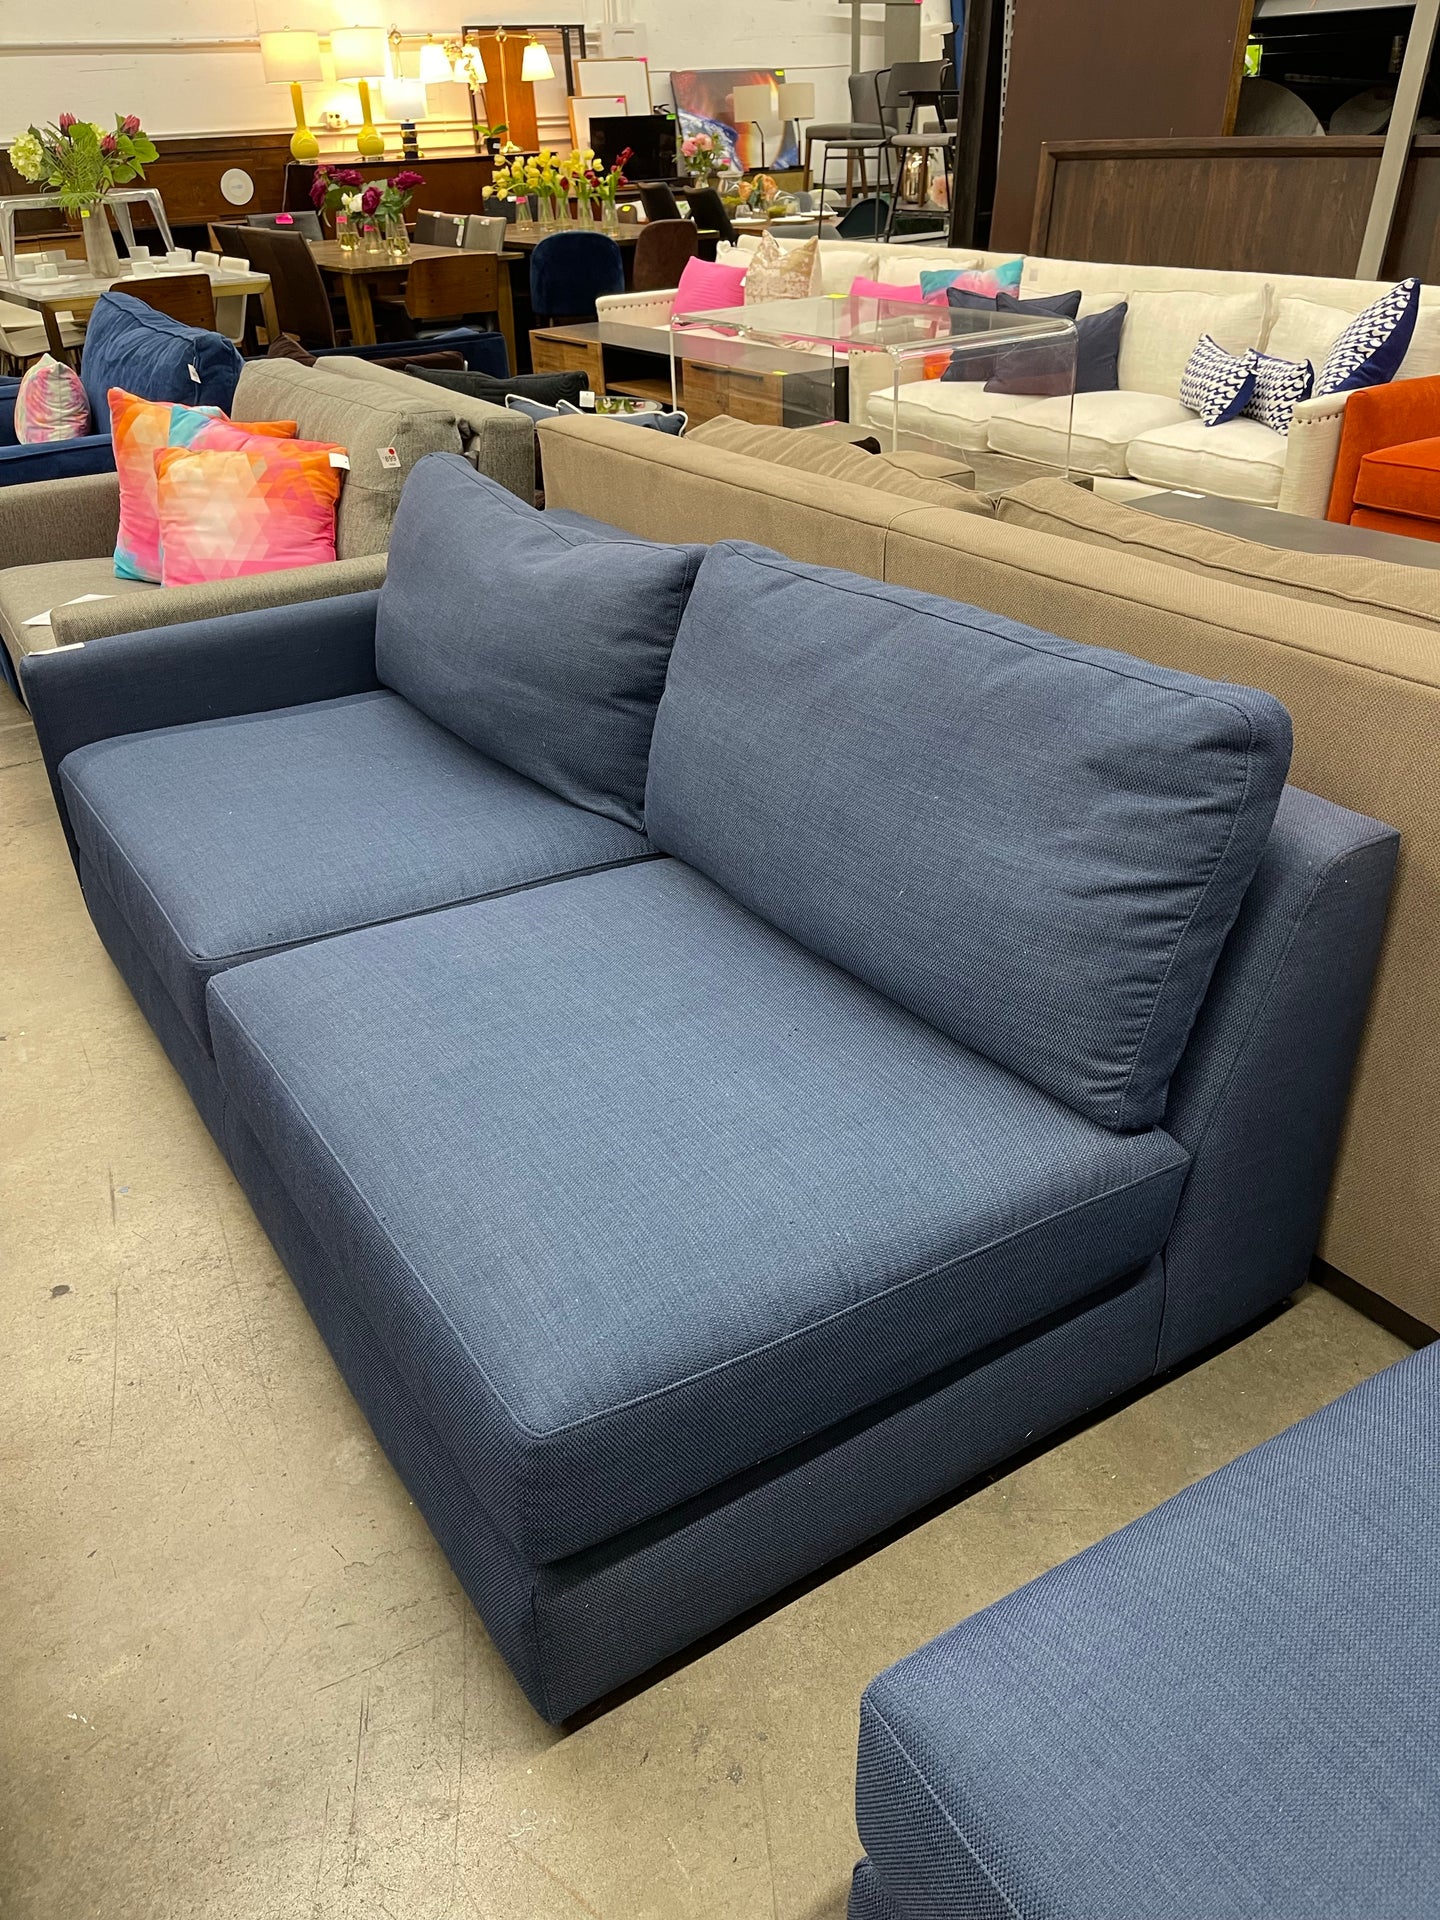 Crate & Barrel Drake Sofa Left Arm or Right Arm in Dark Blue - extra 30% off in store